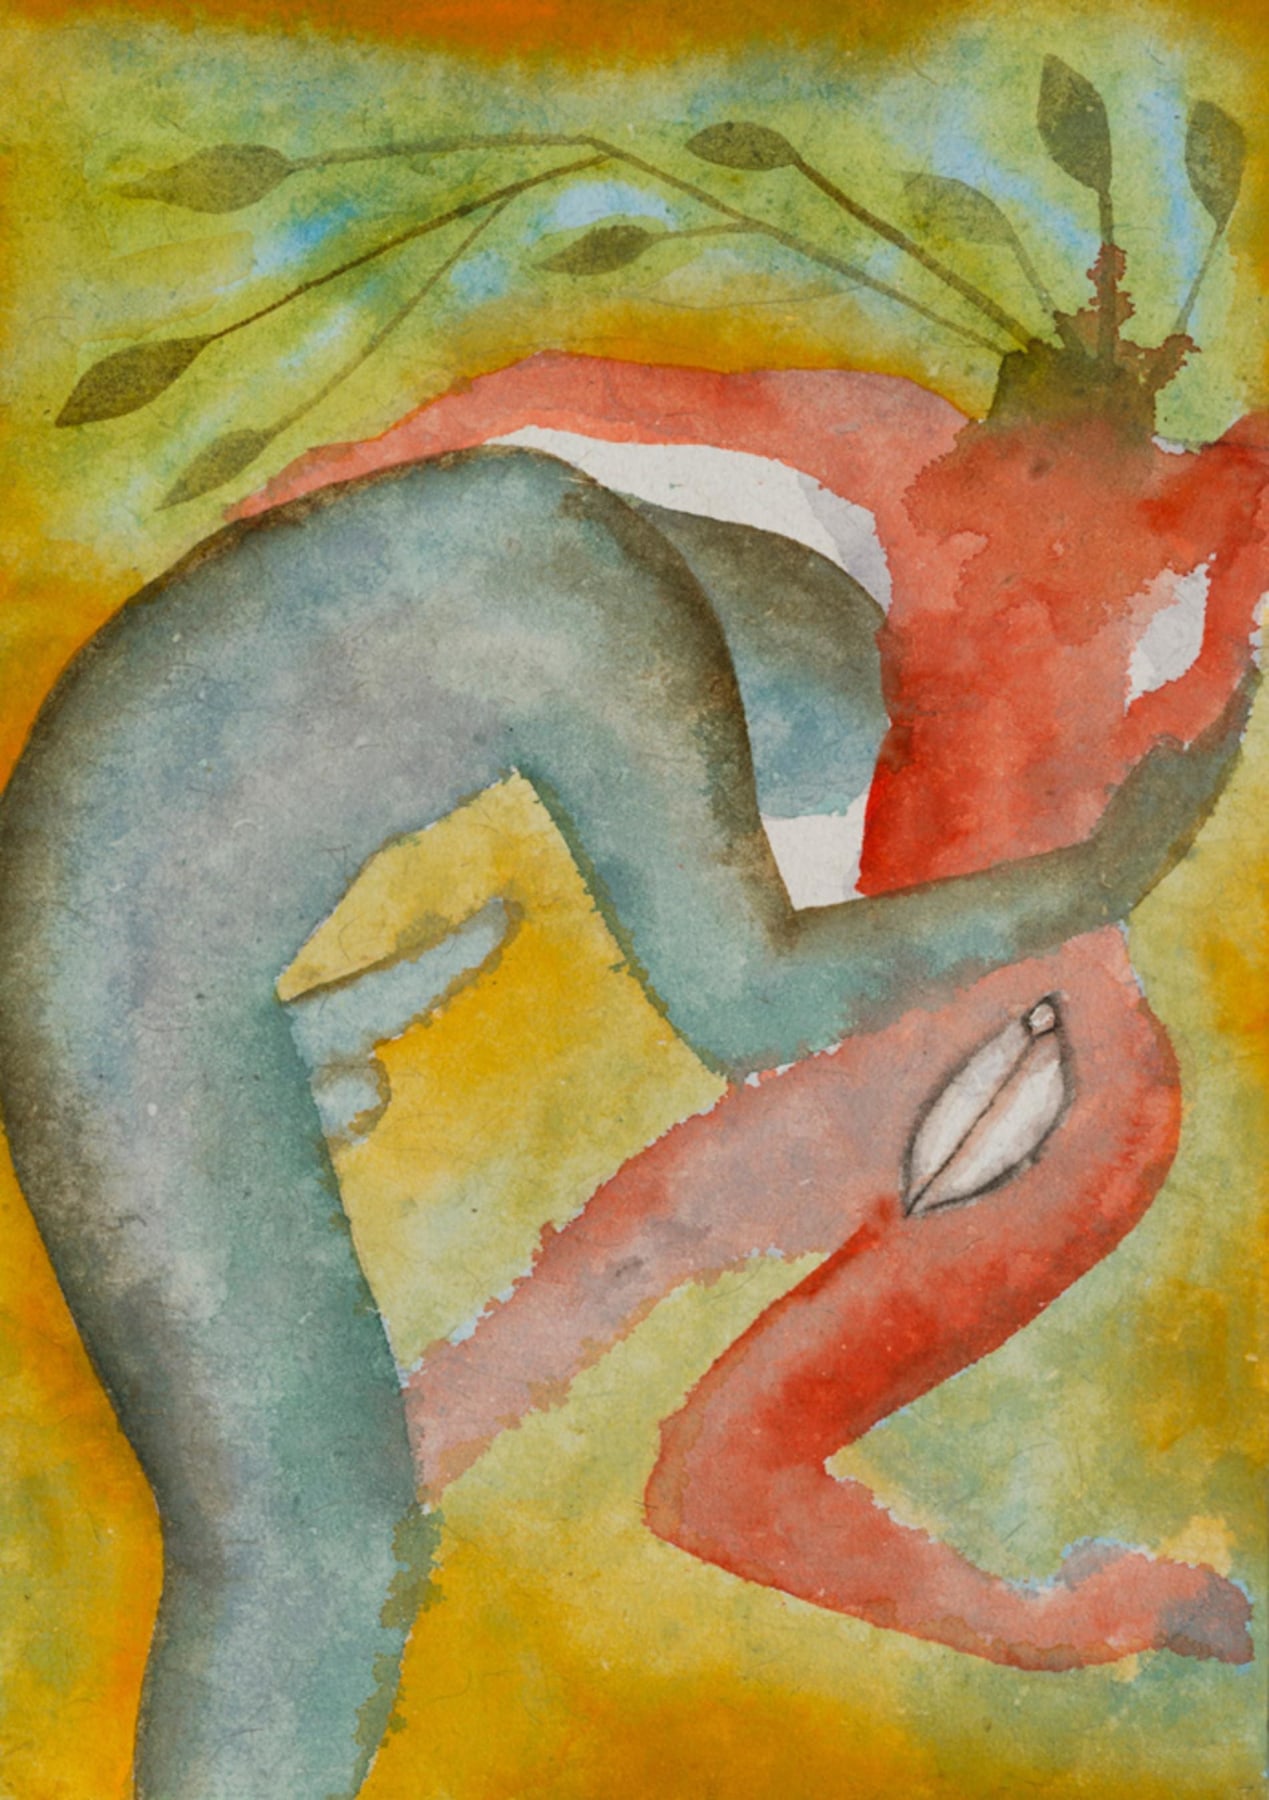 Image of  FRANCESCO CLEMENTE's A Story Well Told (05), 2013